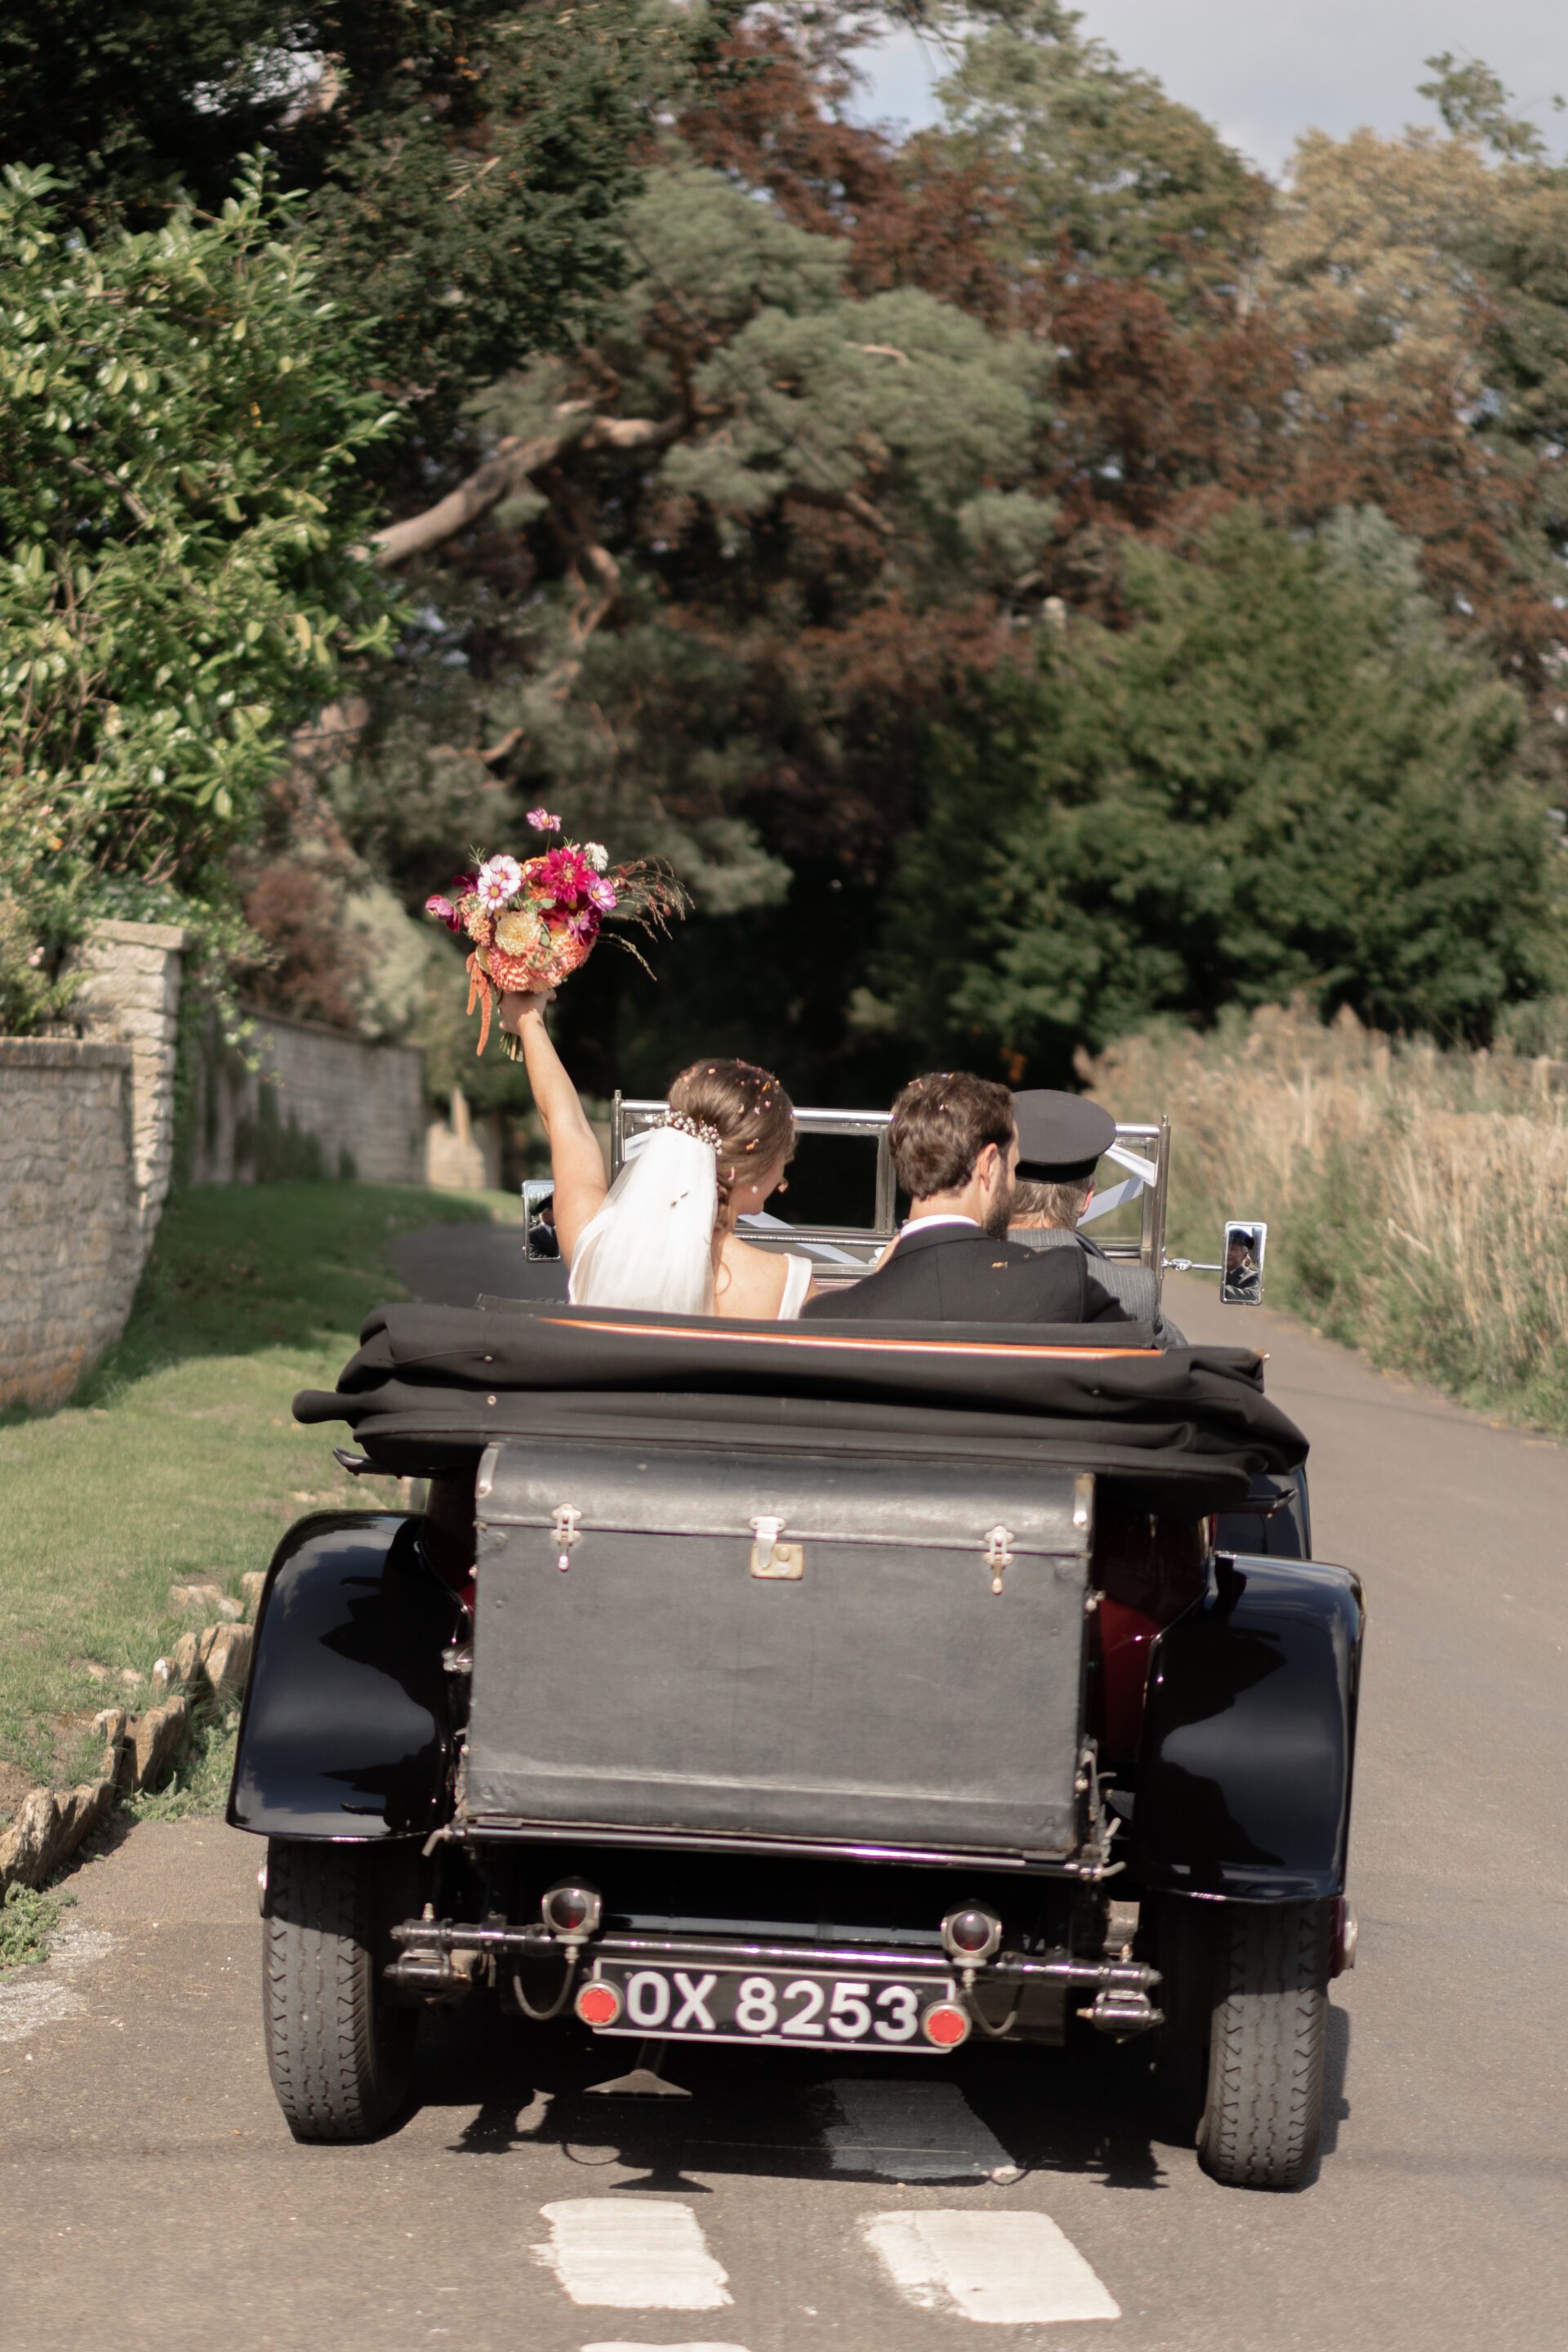 The bride and groom depart their Somerset church wedding in a vintage wedding car